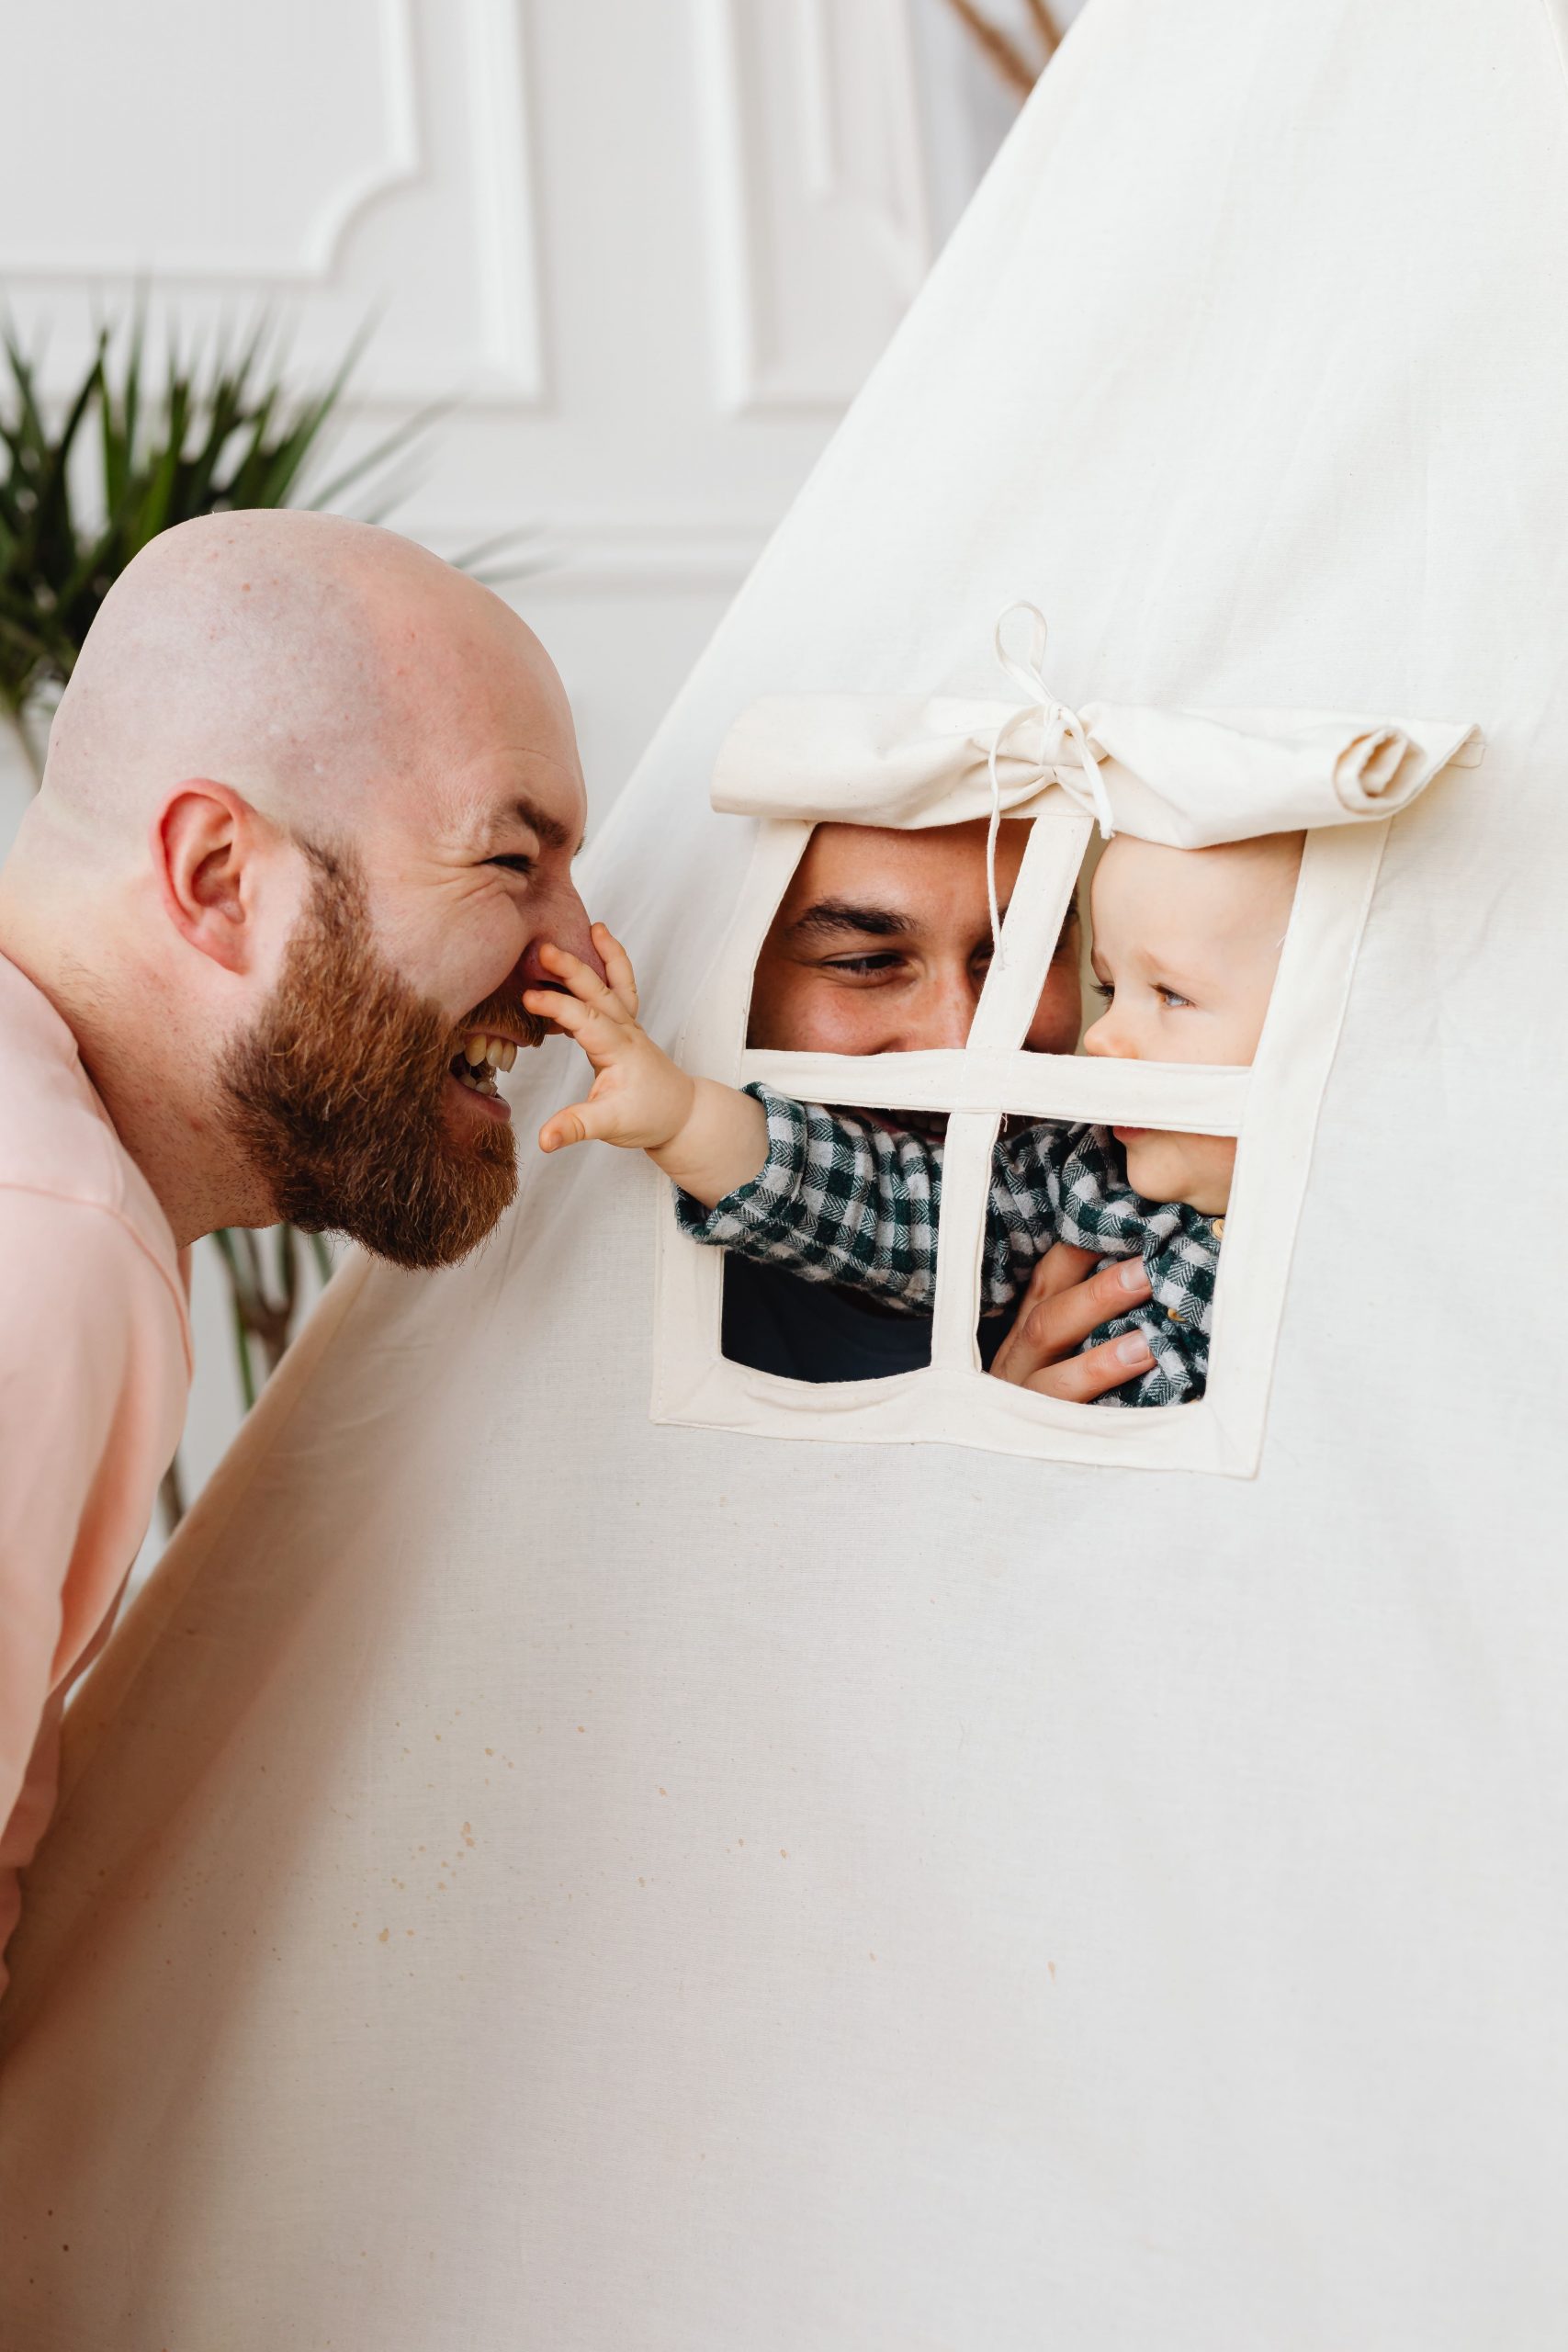 Image description: Two fathers playing with their baby in a tent, all laughing